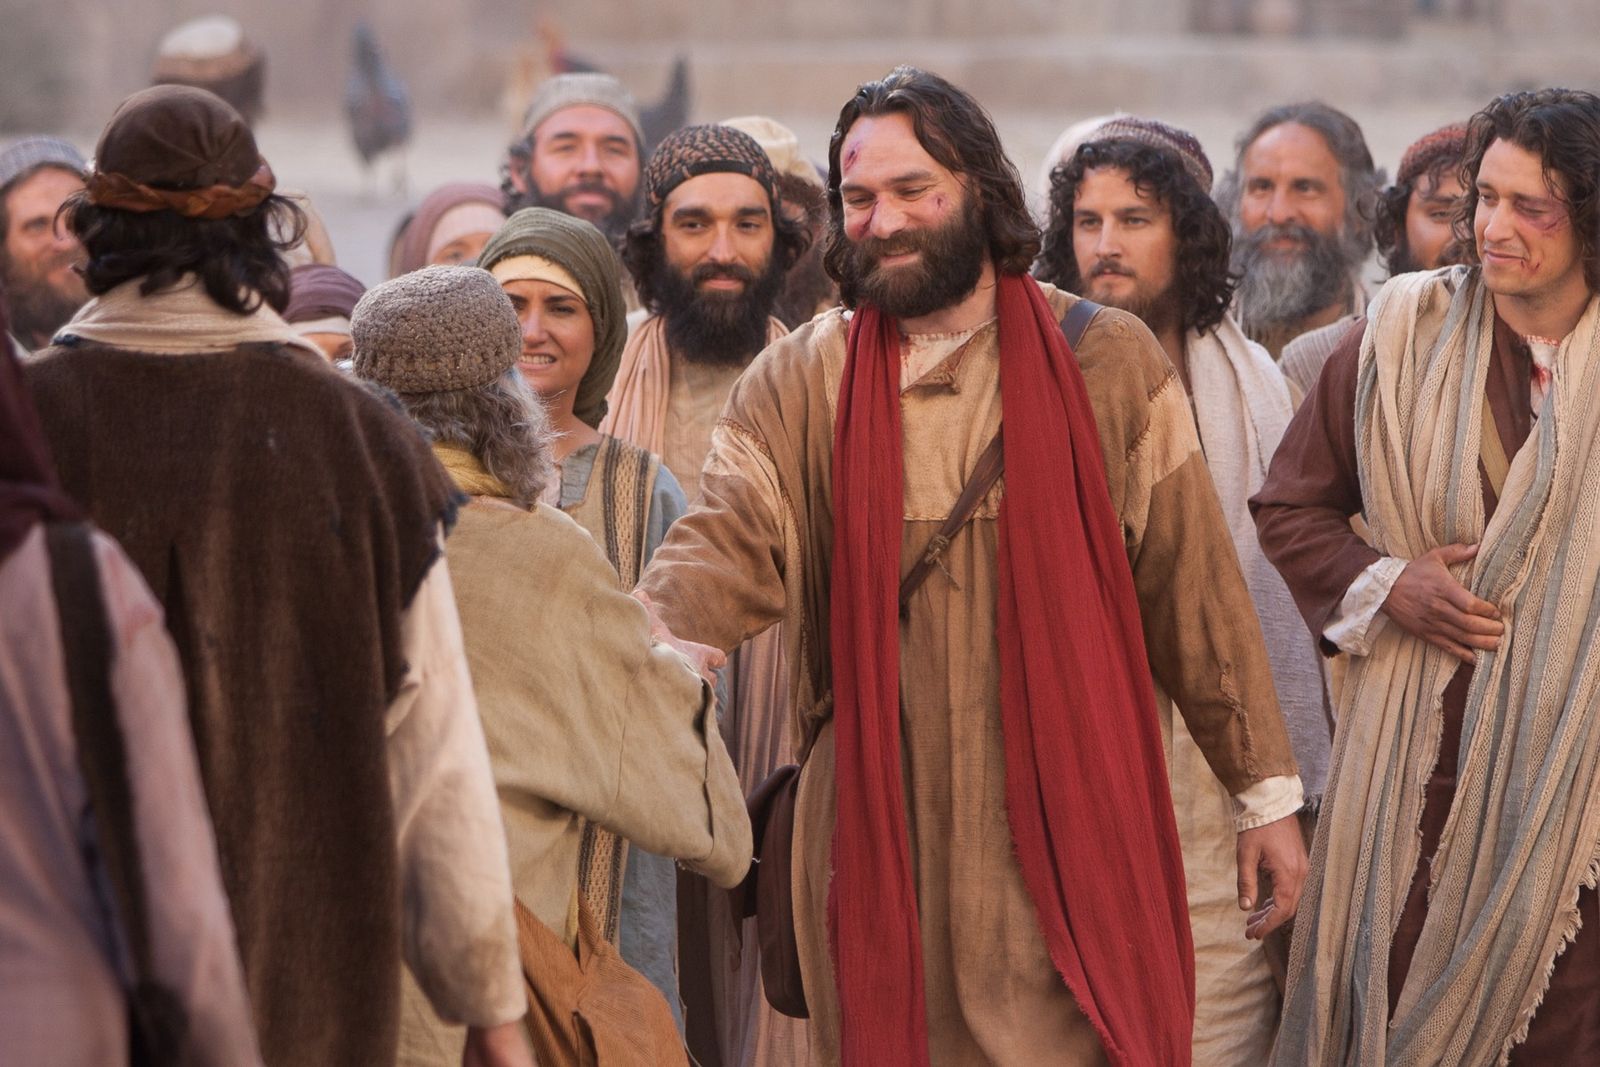 After being beaten, Peter and John continue to preach in Christ's name to the people.